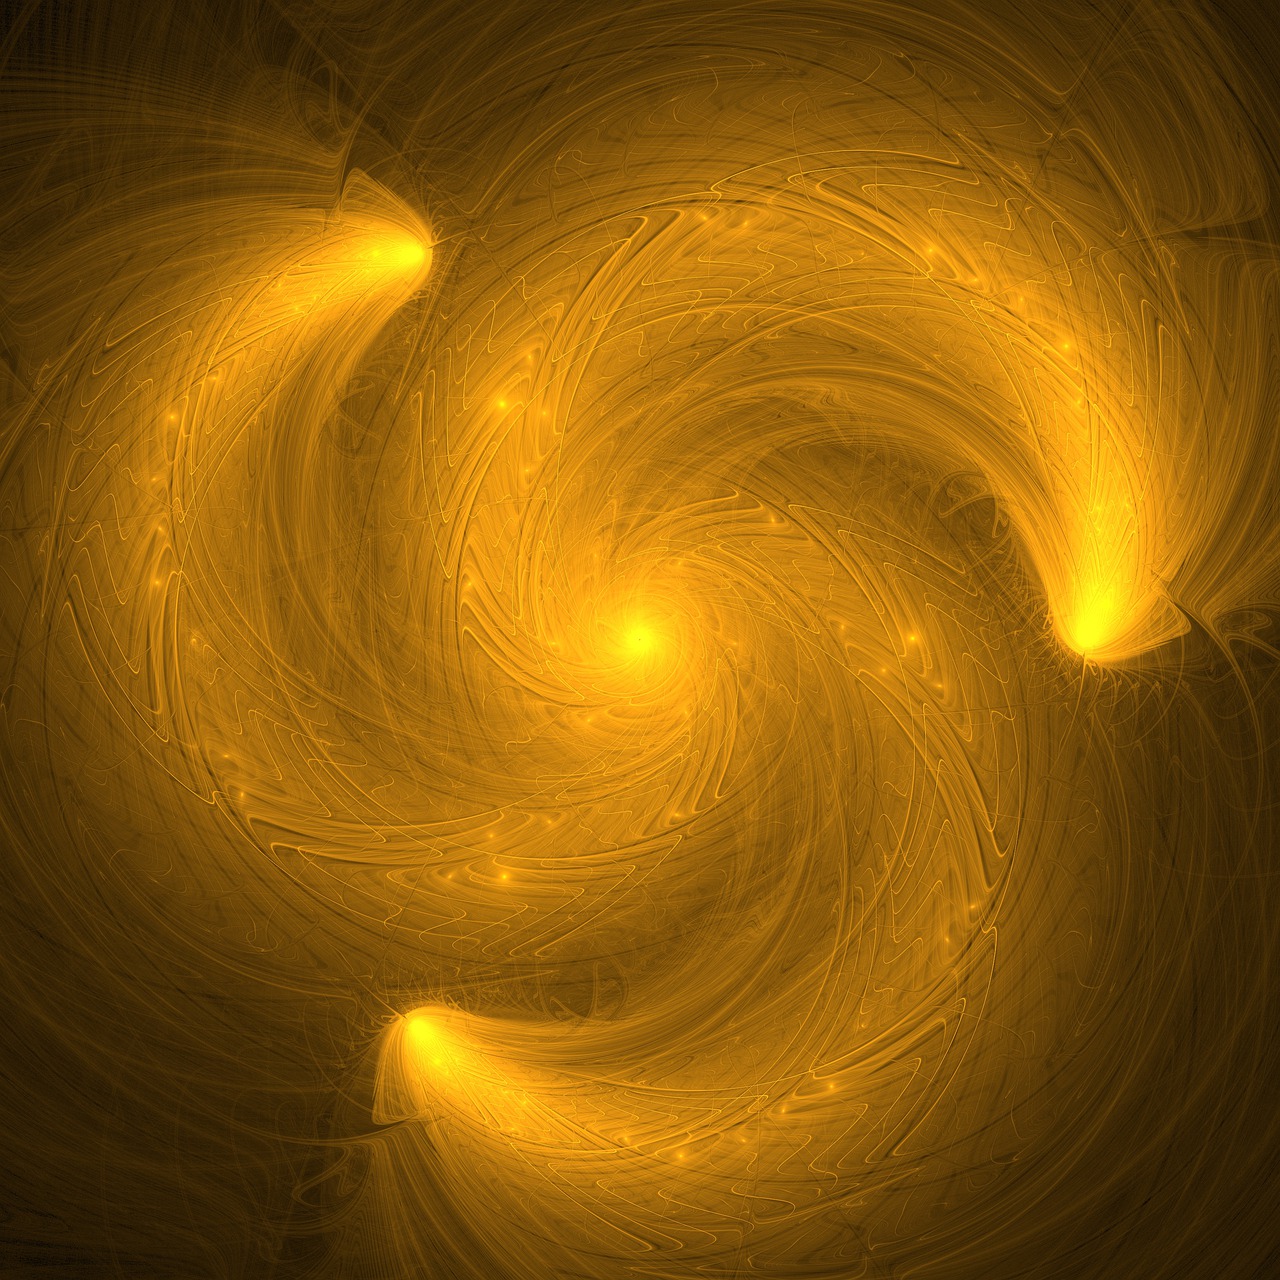 a computer generated image of a spiral, inspired by Lorentz Frölich, generative art, yellow glowing background, metallic nebula, smooth light shading, electric arcs